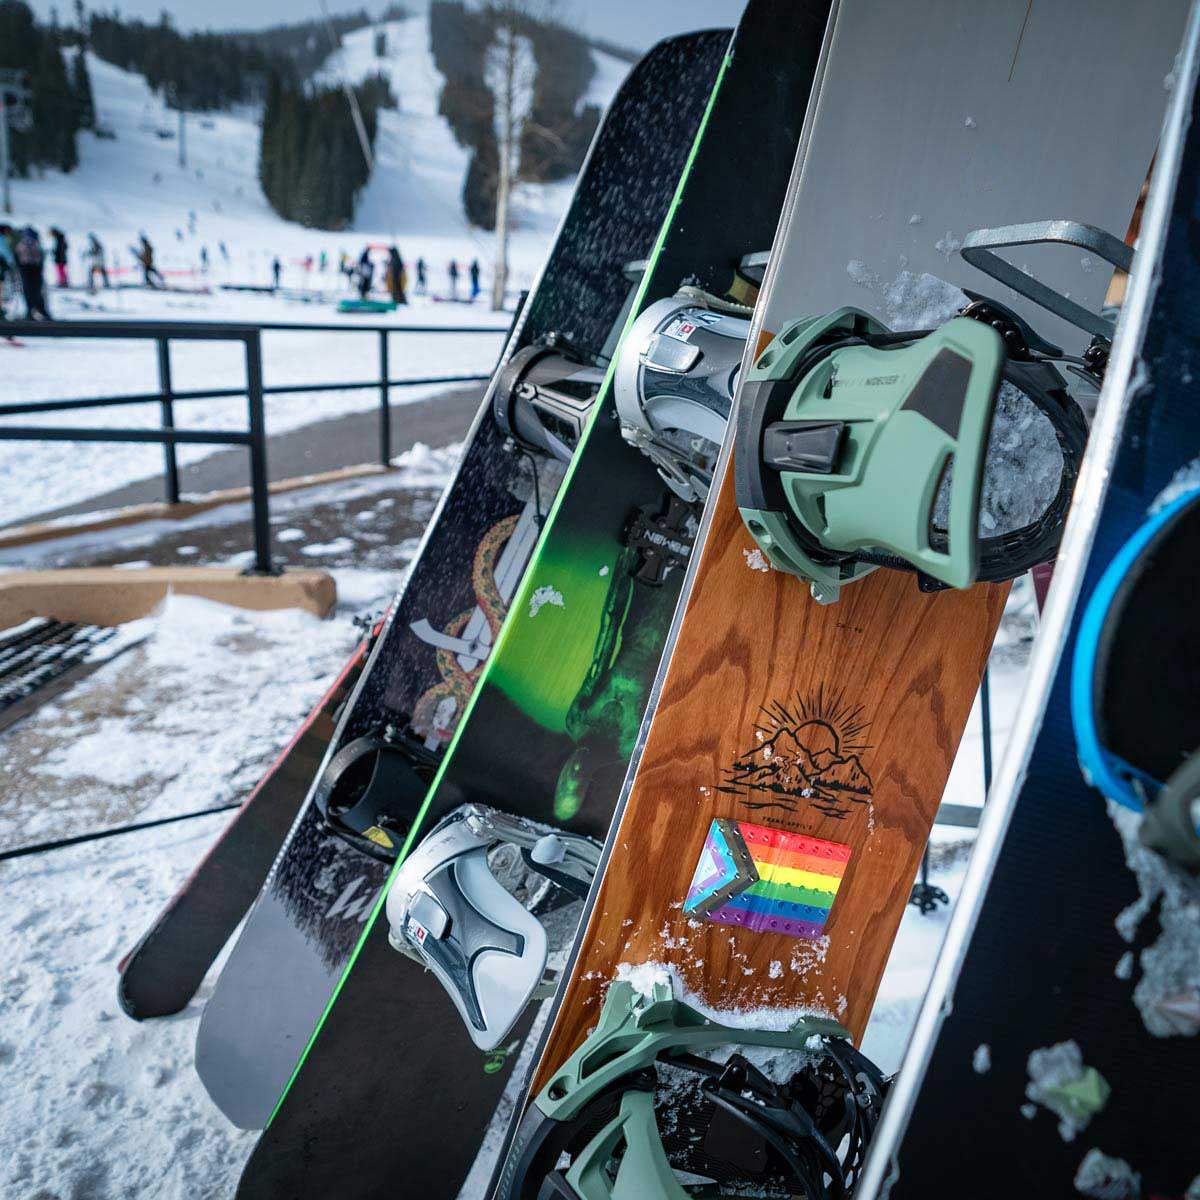 Progress LGBTQ Pride Flag Snowboard Stomp Pad in a rack with other snowboards